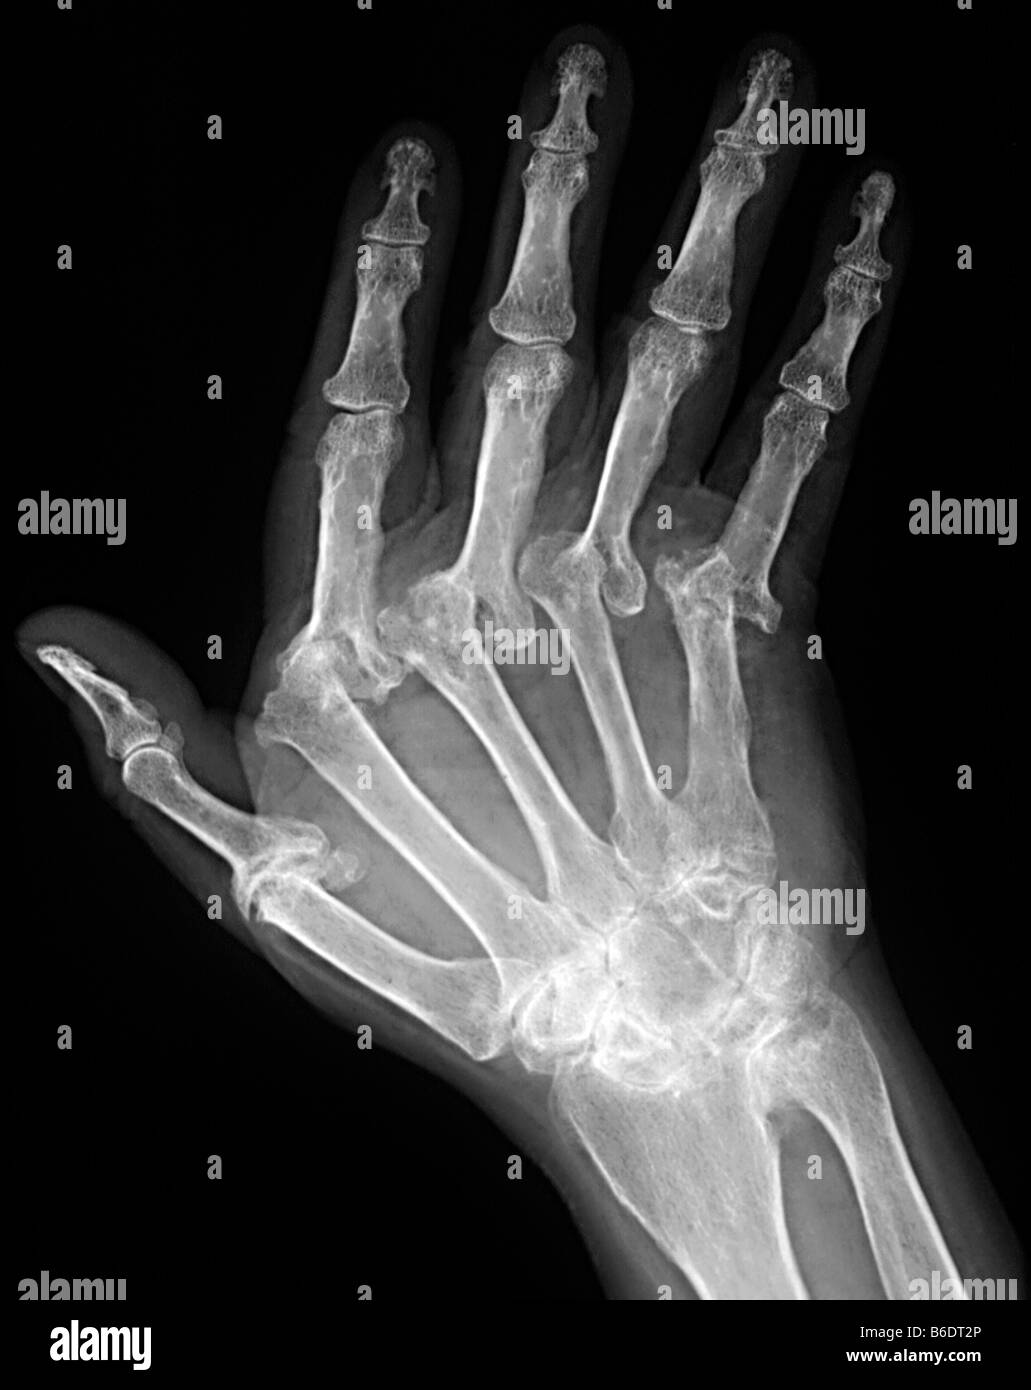 Arthritic hand. X-ray of the hand of a patient with severe rheumatoid arthritis in all of their fingers. The thumb is at left. Stock Photo